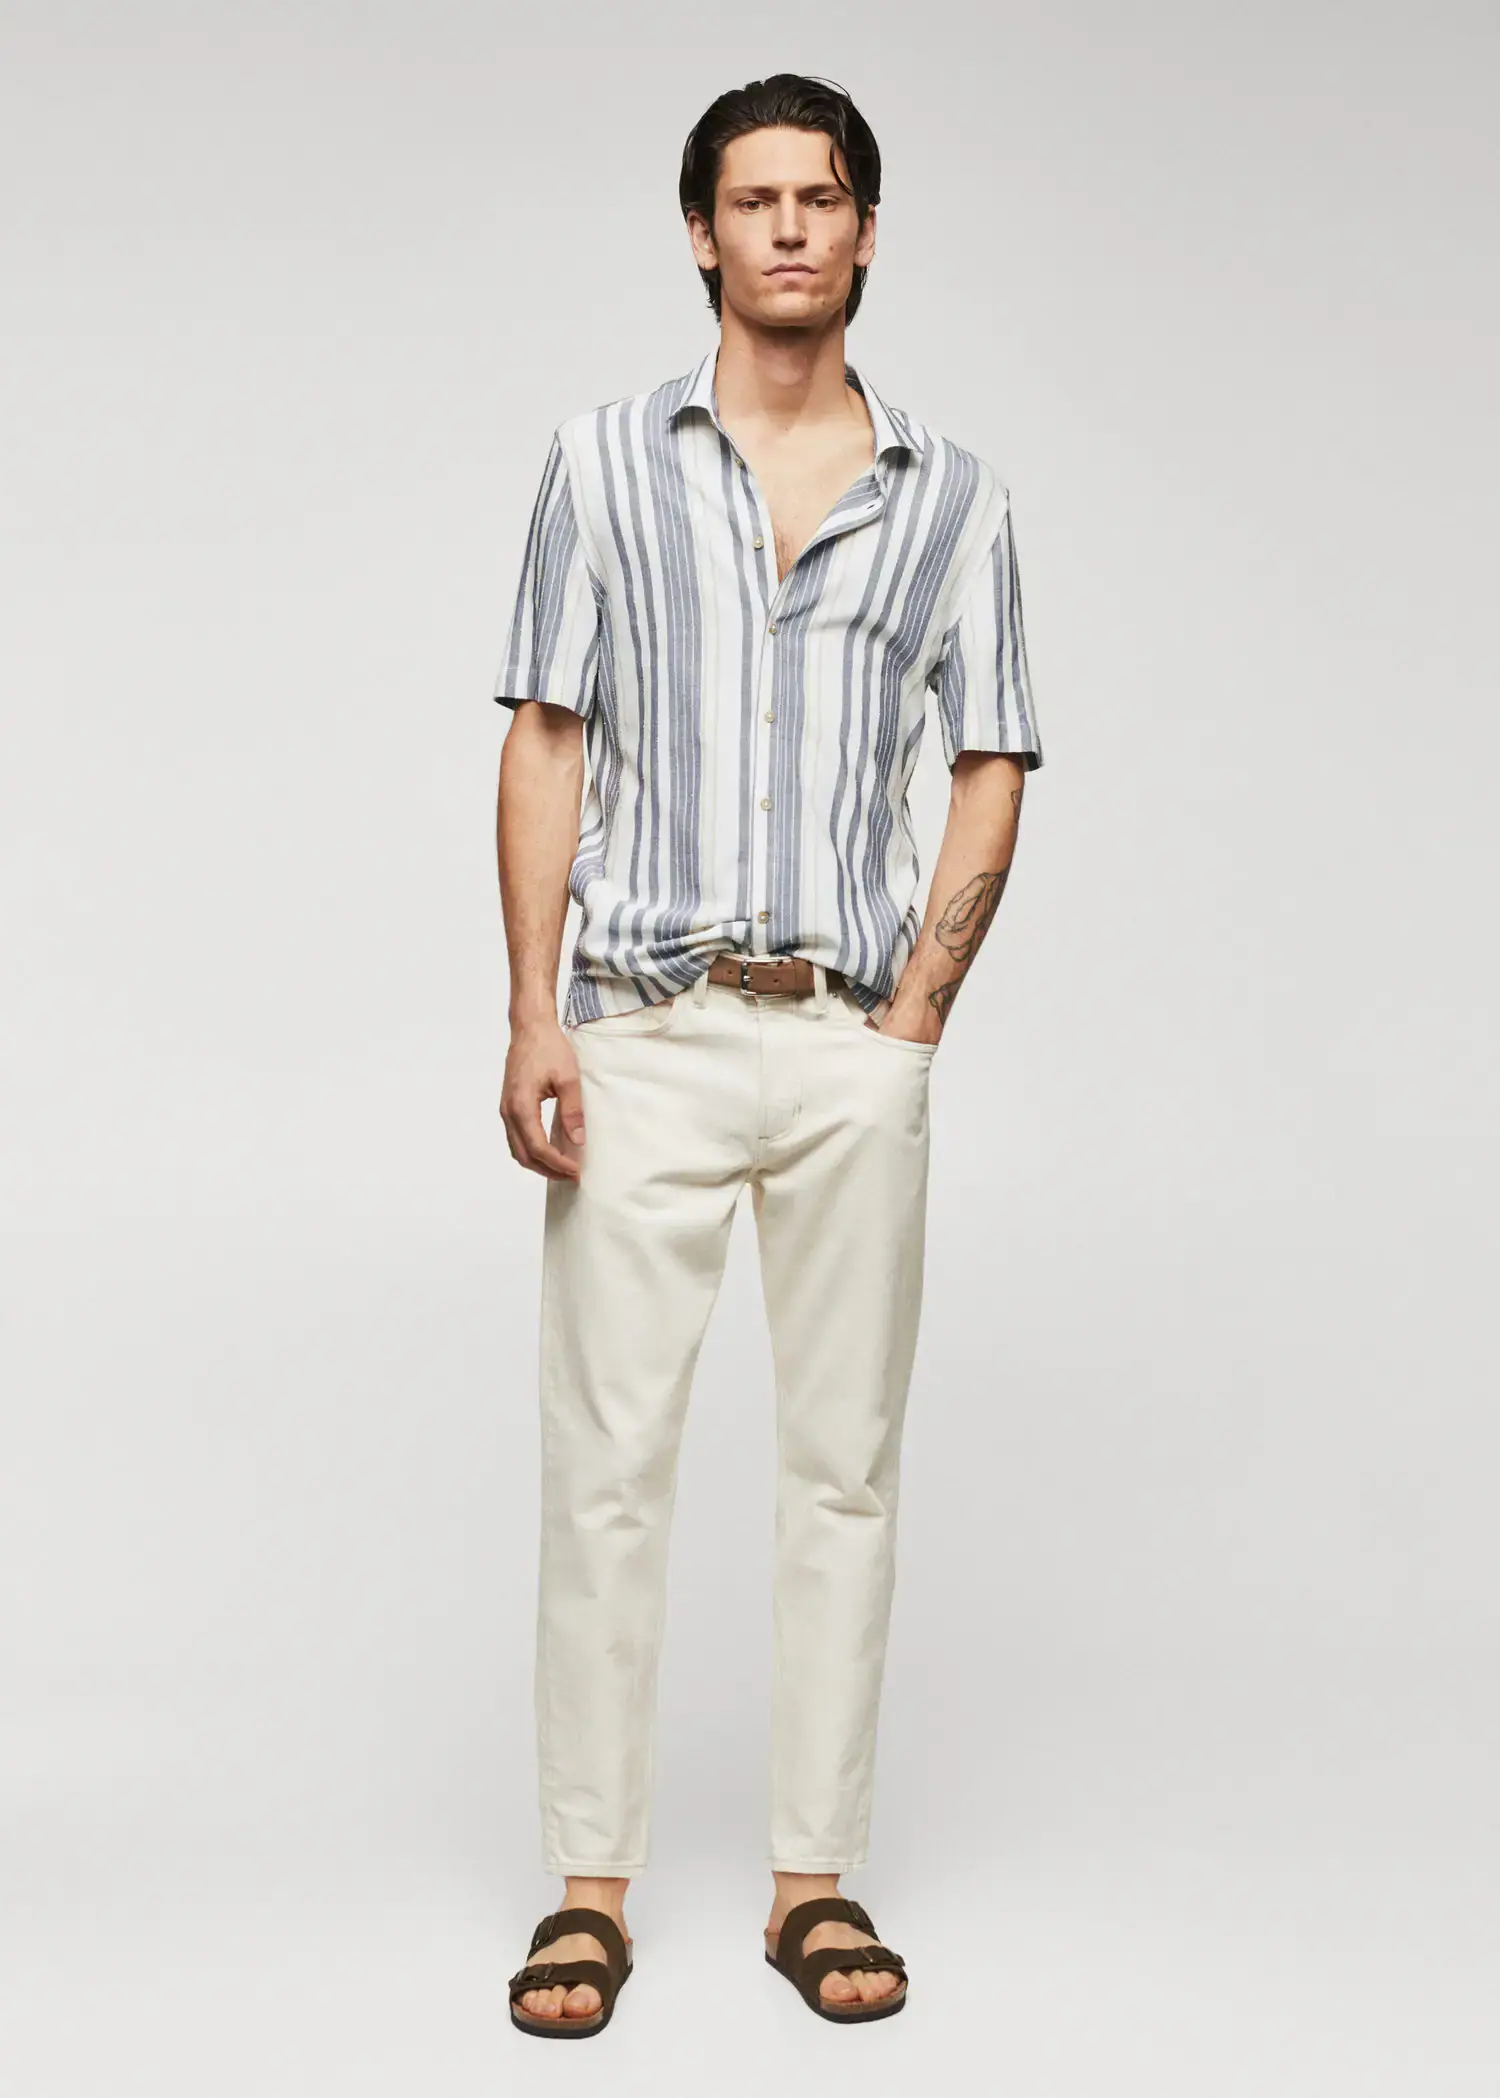 Mango Striped slim-fit shirt. a man in a striped shirt and white pants. 